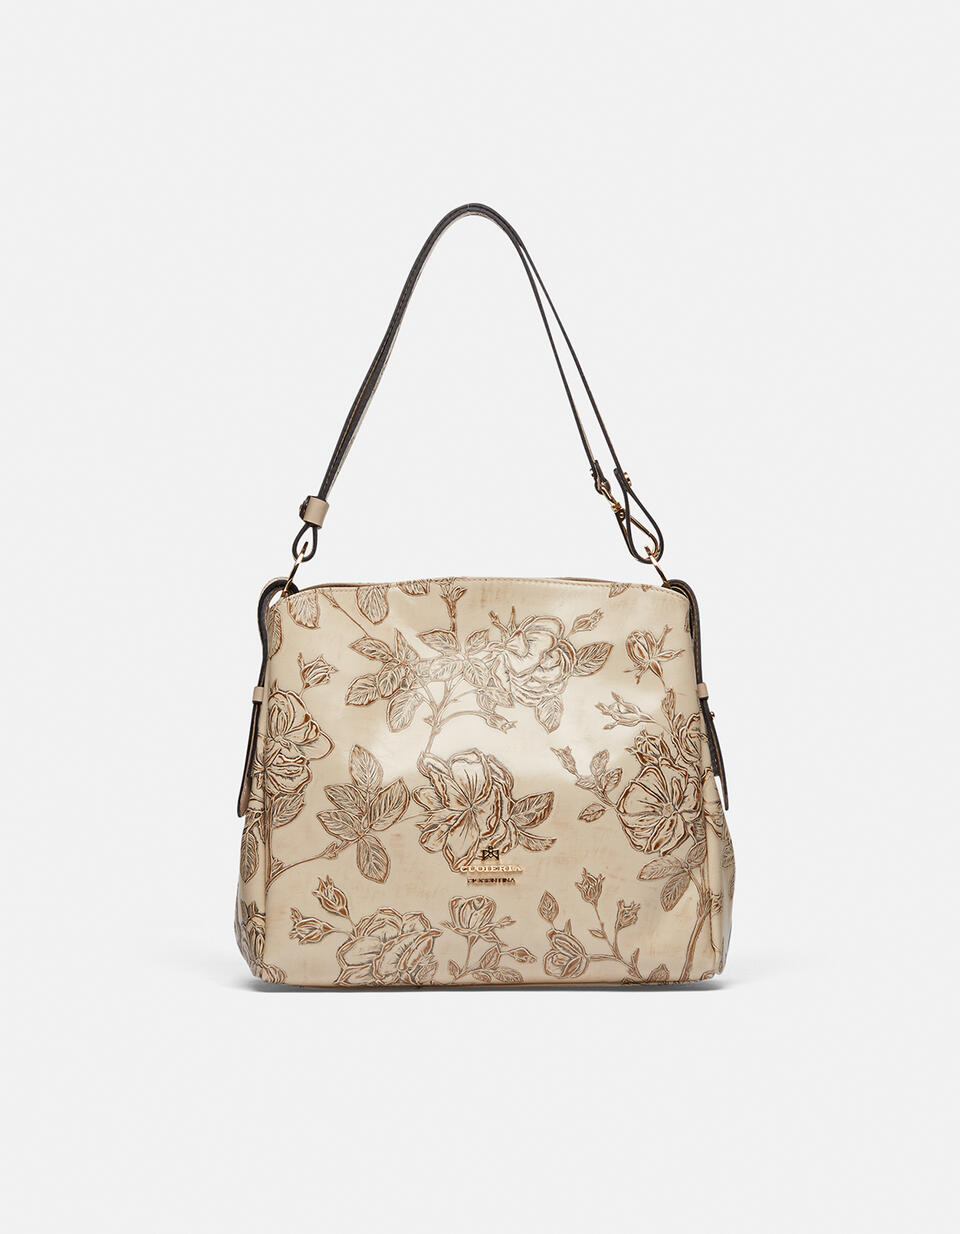 Hobo Taupe  - Shoulder Bags - Women's Bags - Bags - Cuoieria Fiorentina